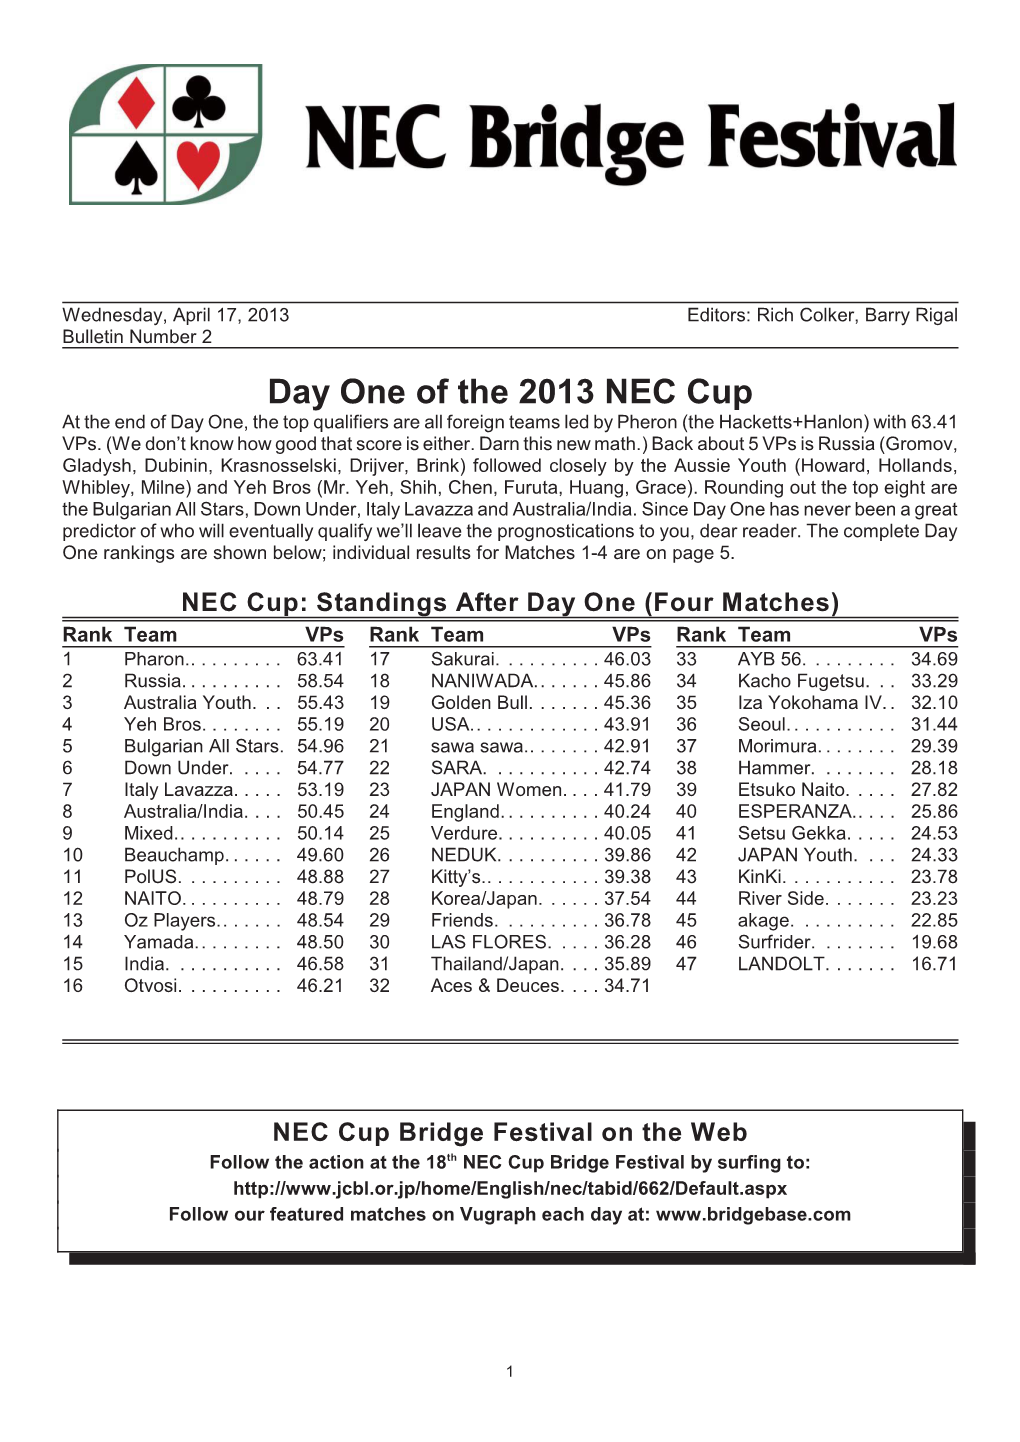 Day One of the 2013 NEC Cup at the End of Day One, the Top Qualifiers Are All Foreign Teams Led by Pheron (The Hacketts+Hanlon) with 63.41 Vps